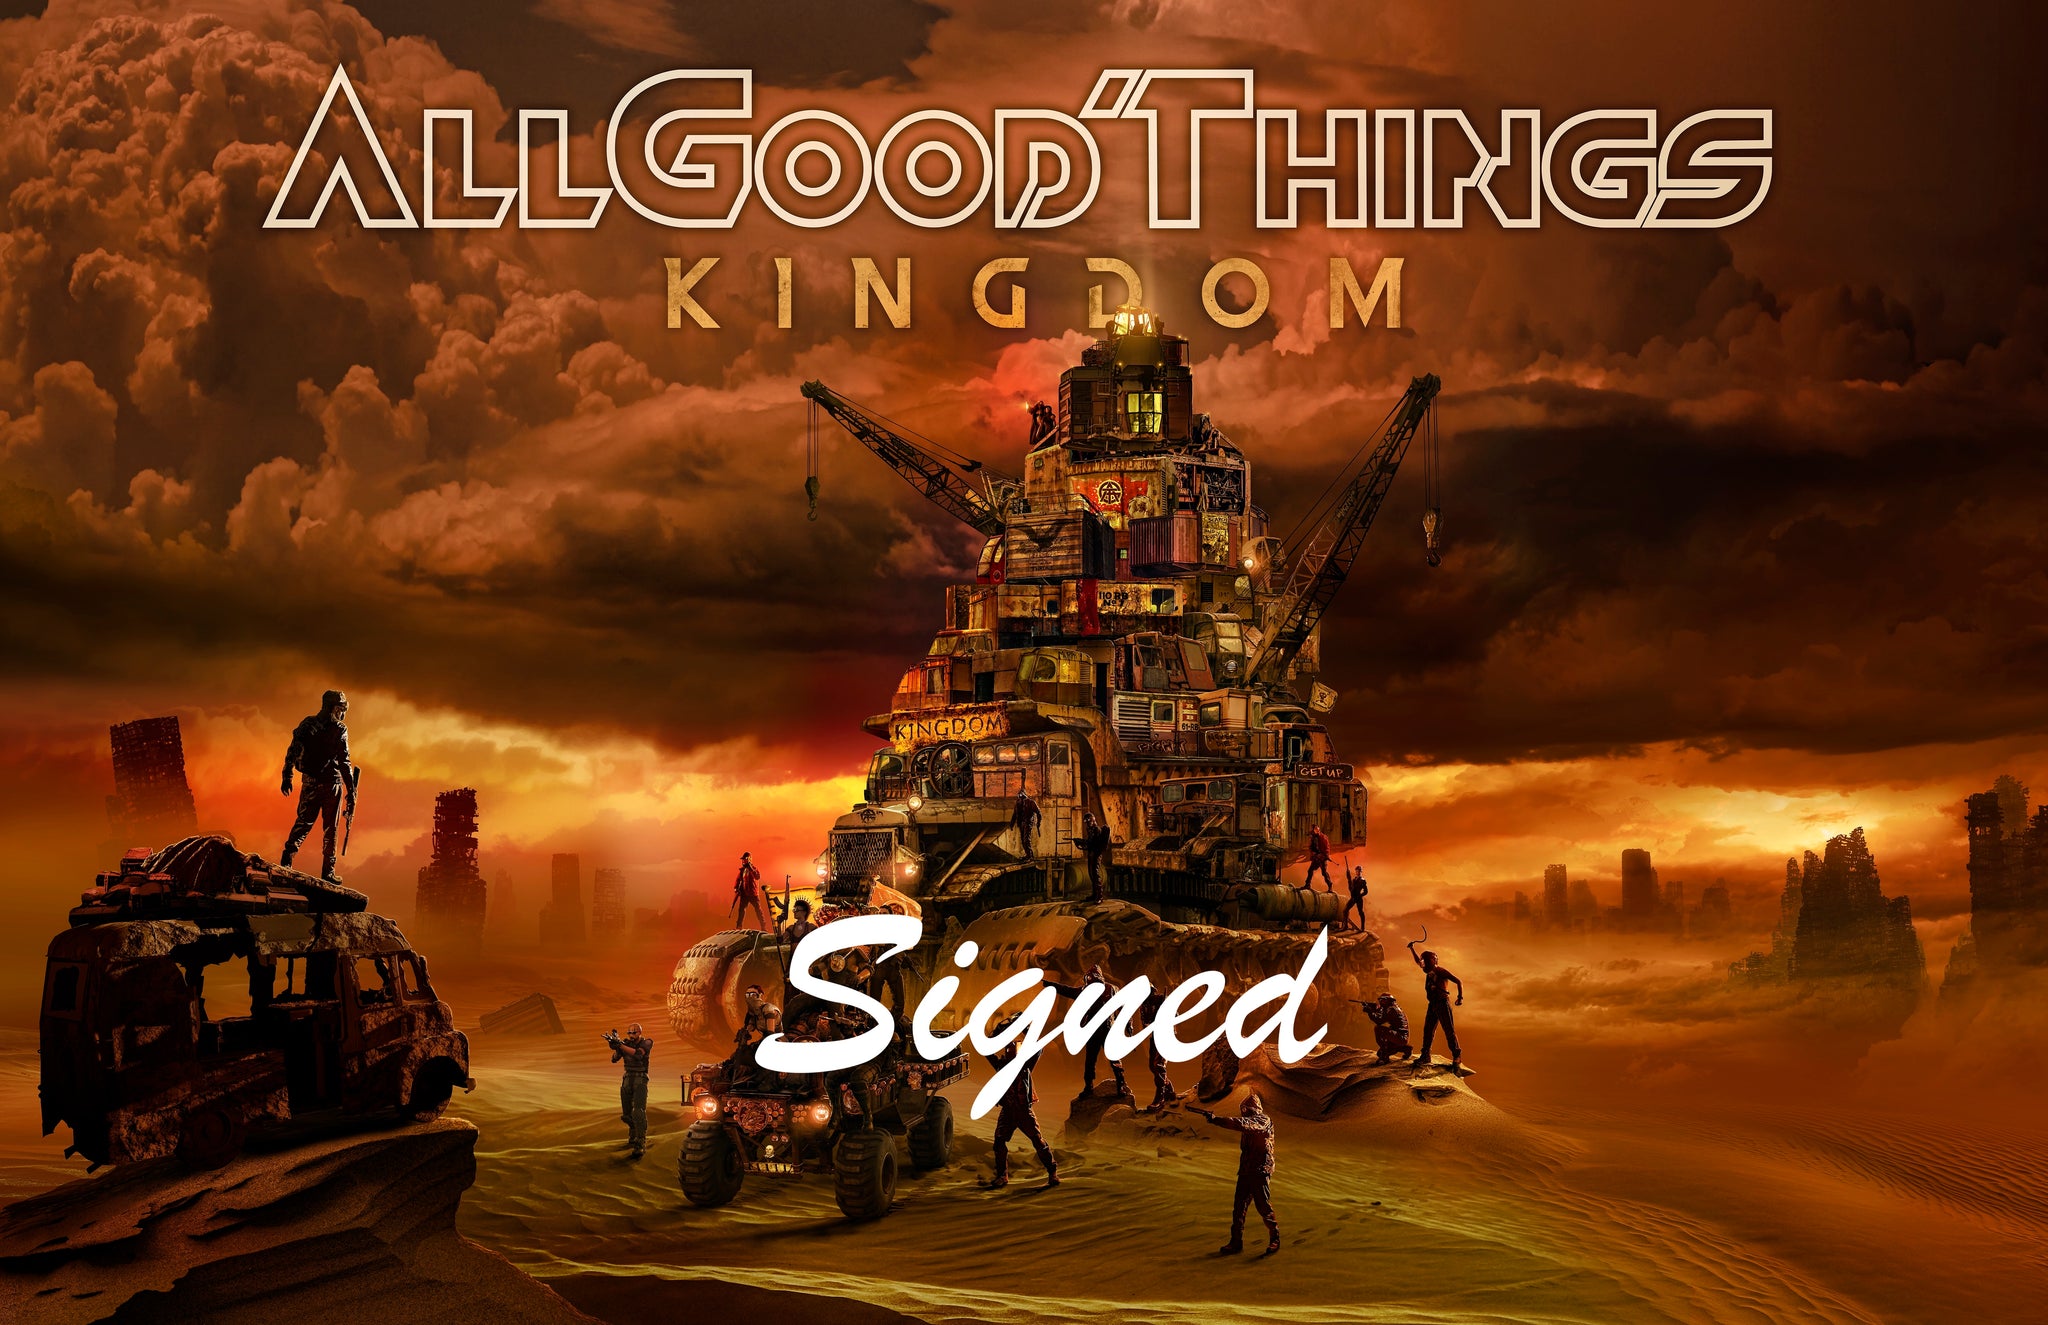 ALL GOOD THINGS - LIMITED EDITION 5 POSTER BUNDLE **SIGNED**